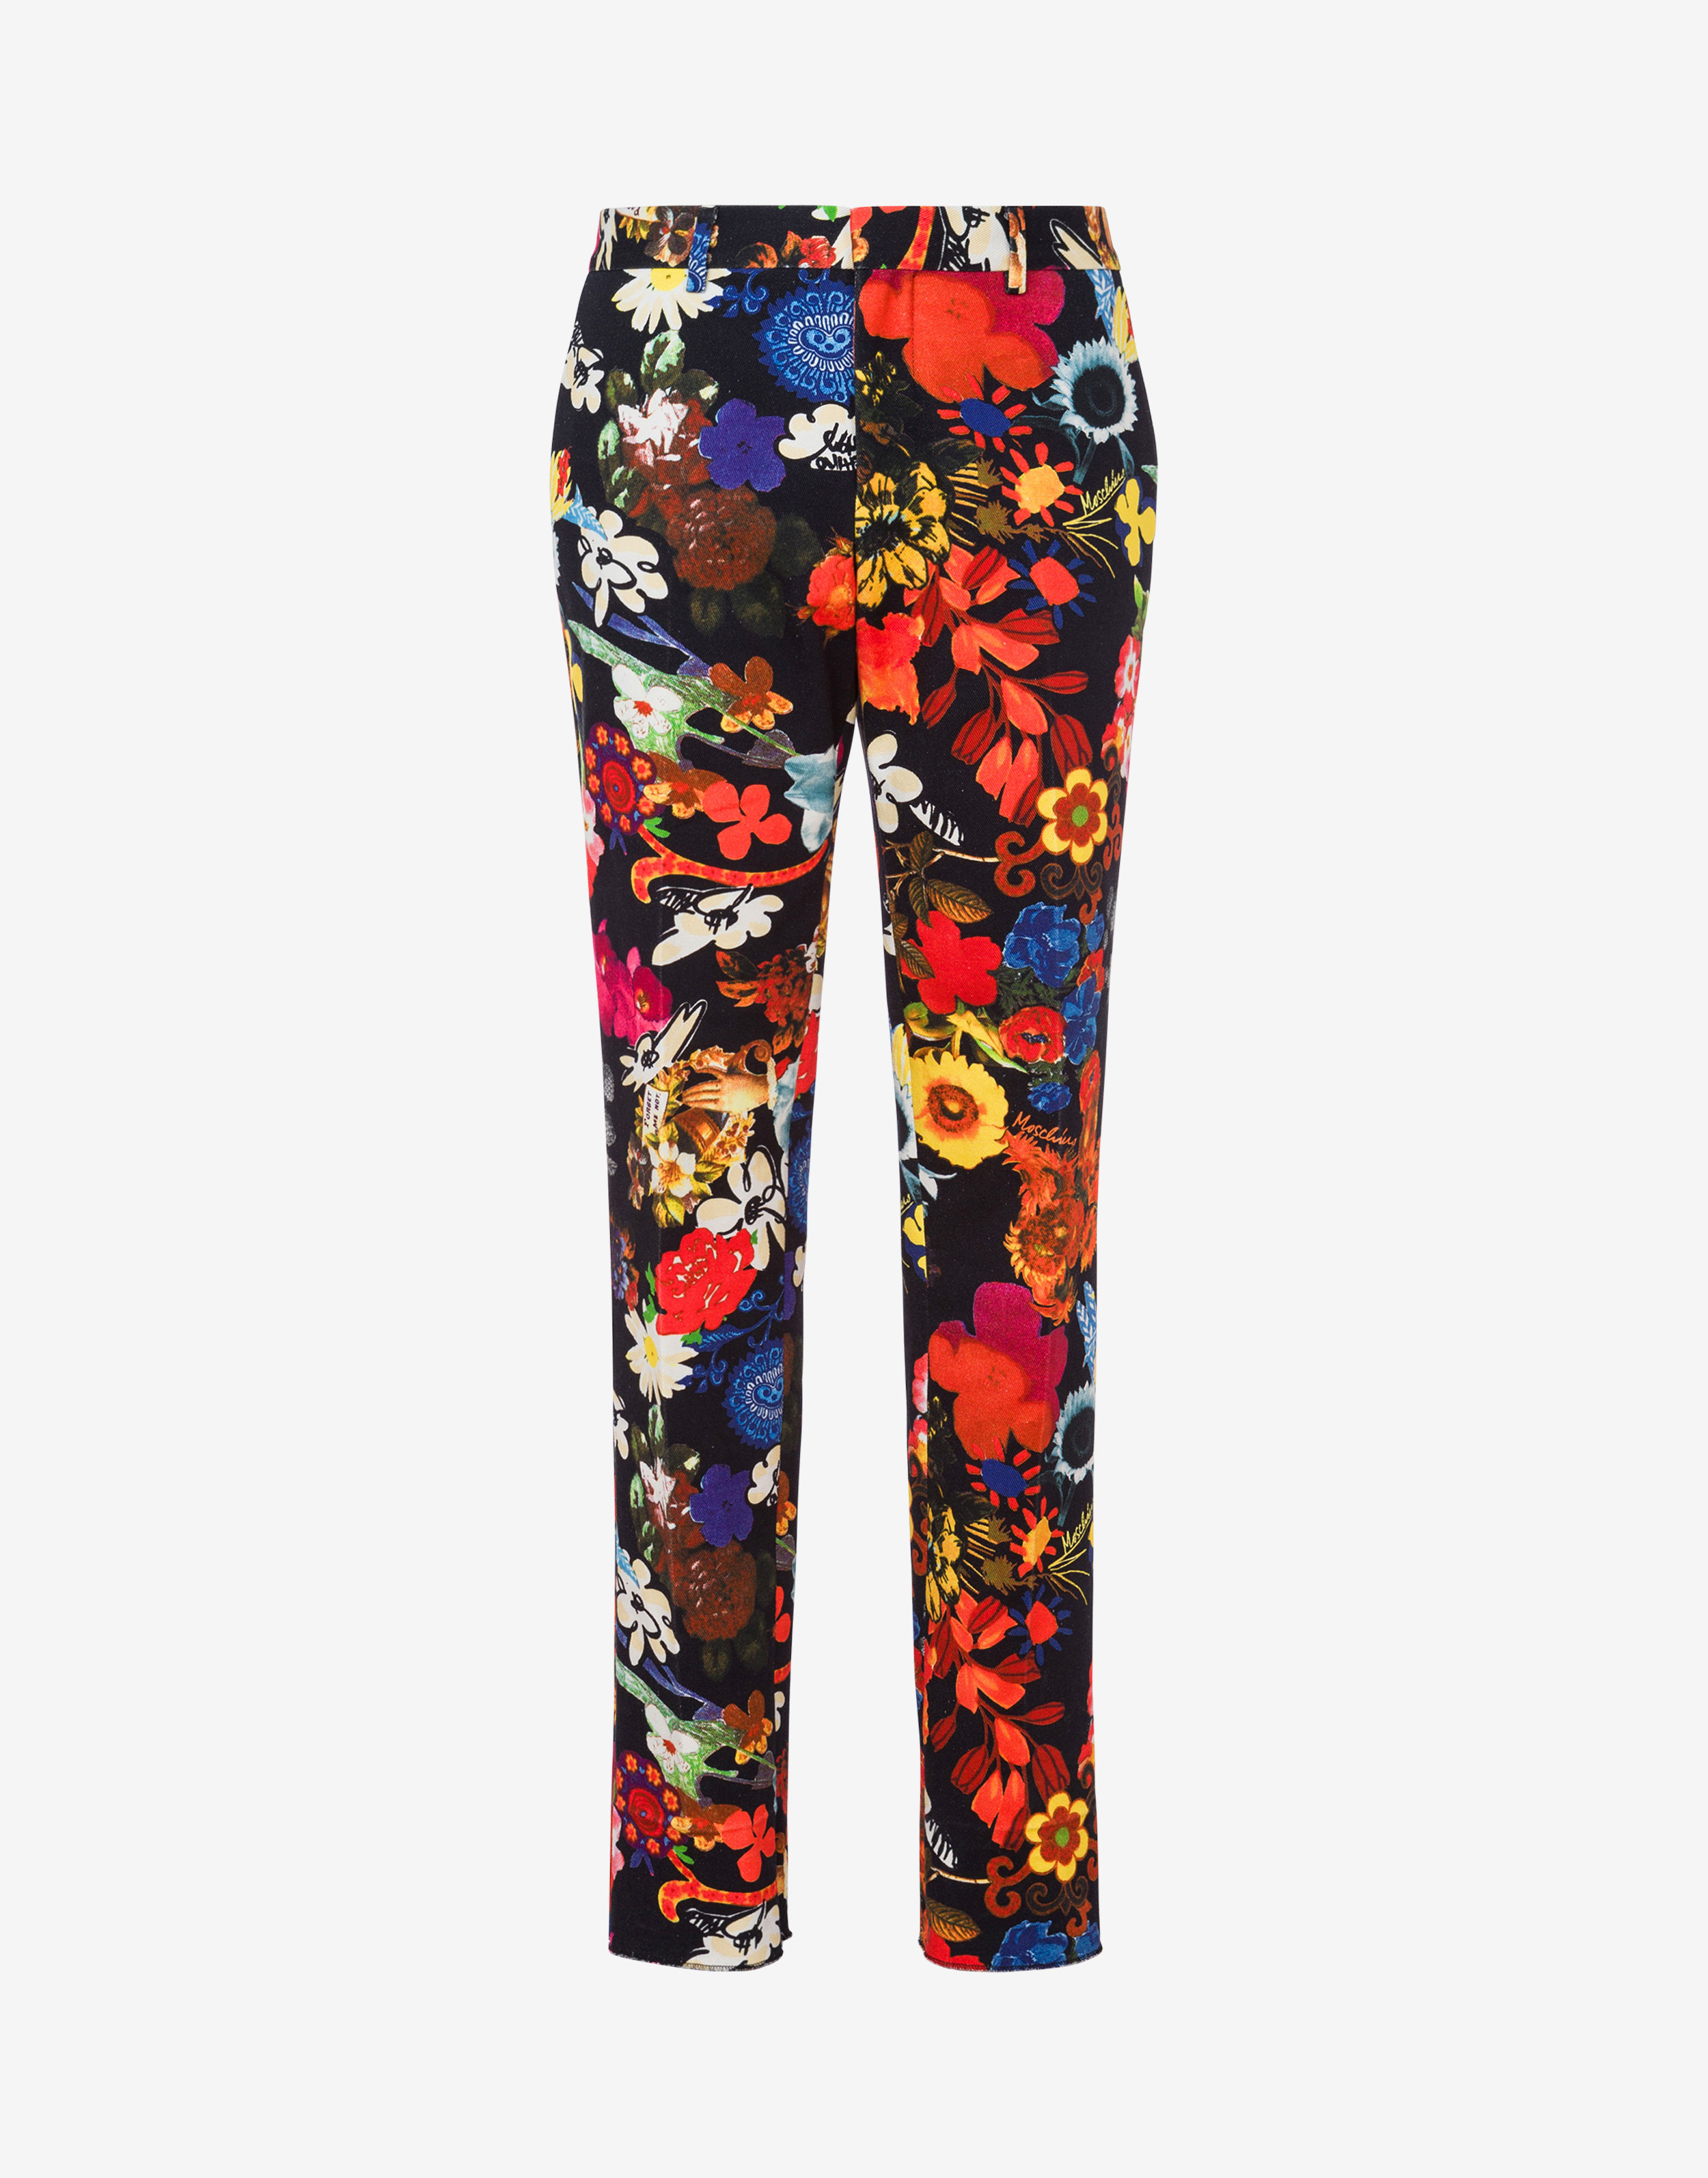 Floral Trousers with a new purchase from Zara. | Mummabstylish